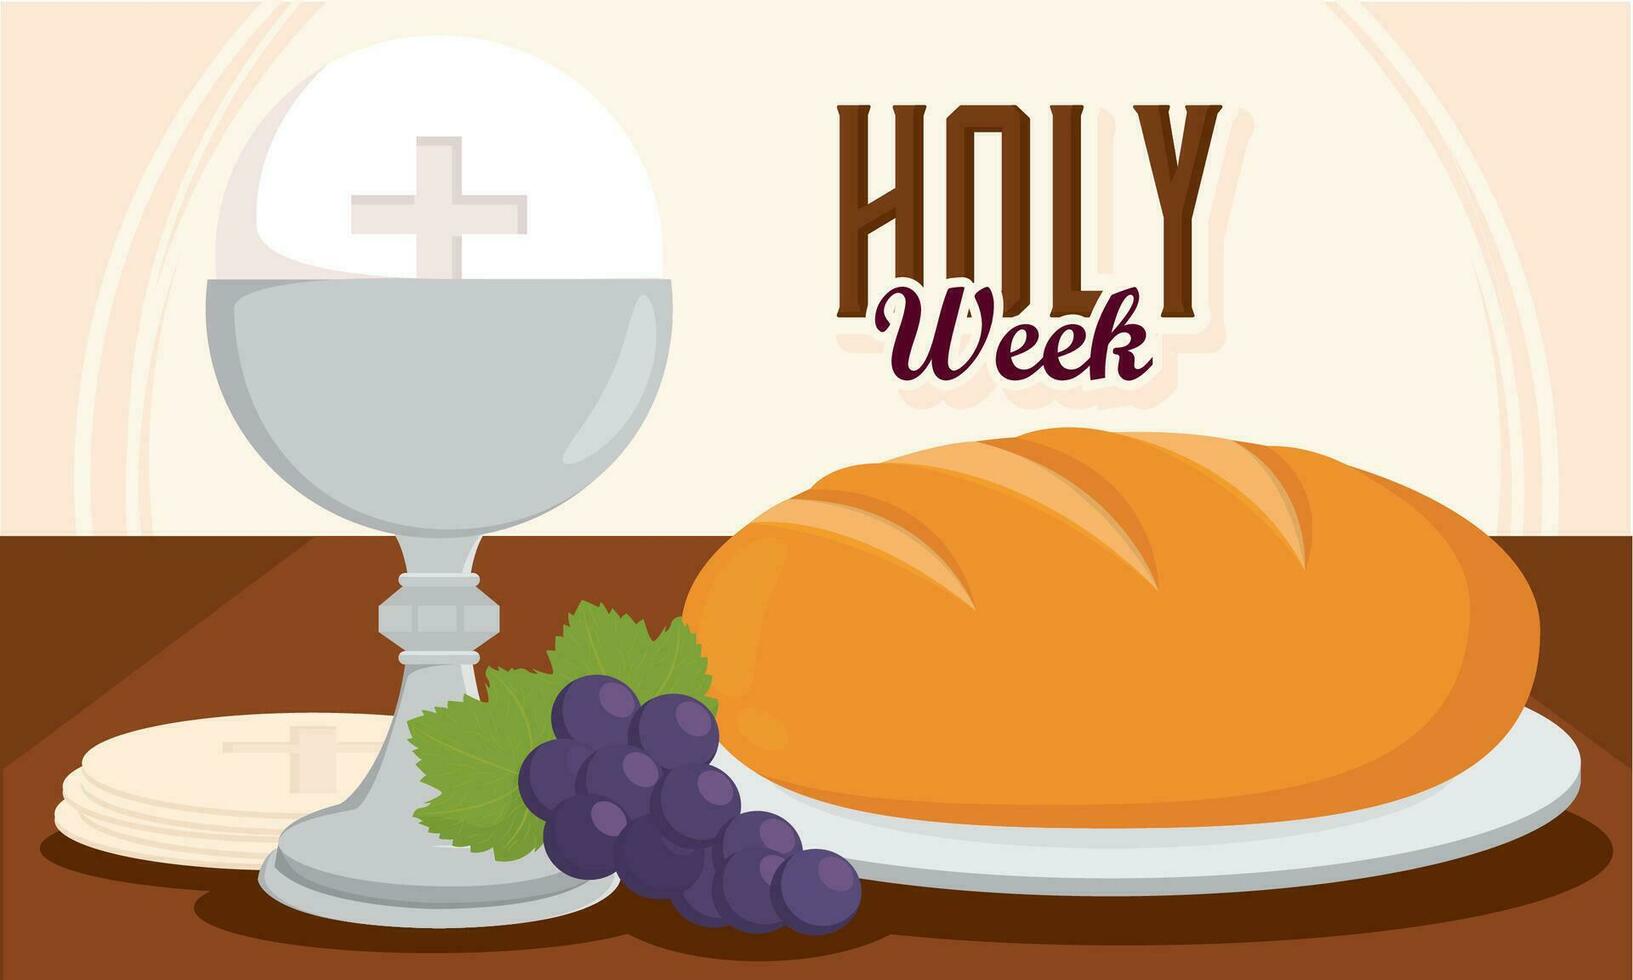 Bread chalice communion wafer grapes Holy week Vector